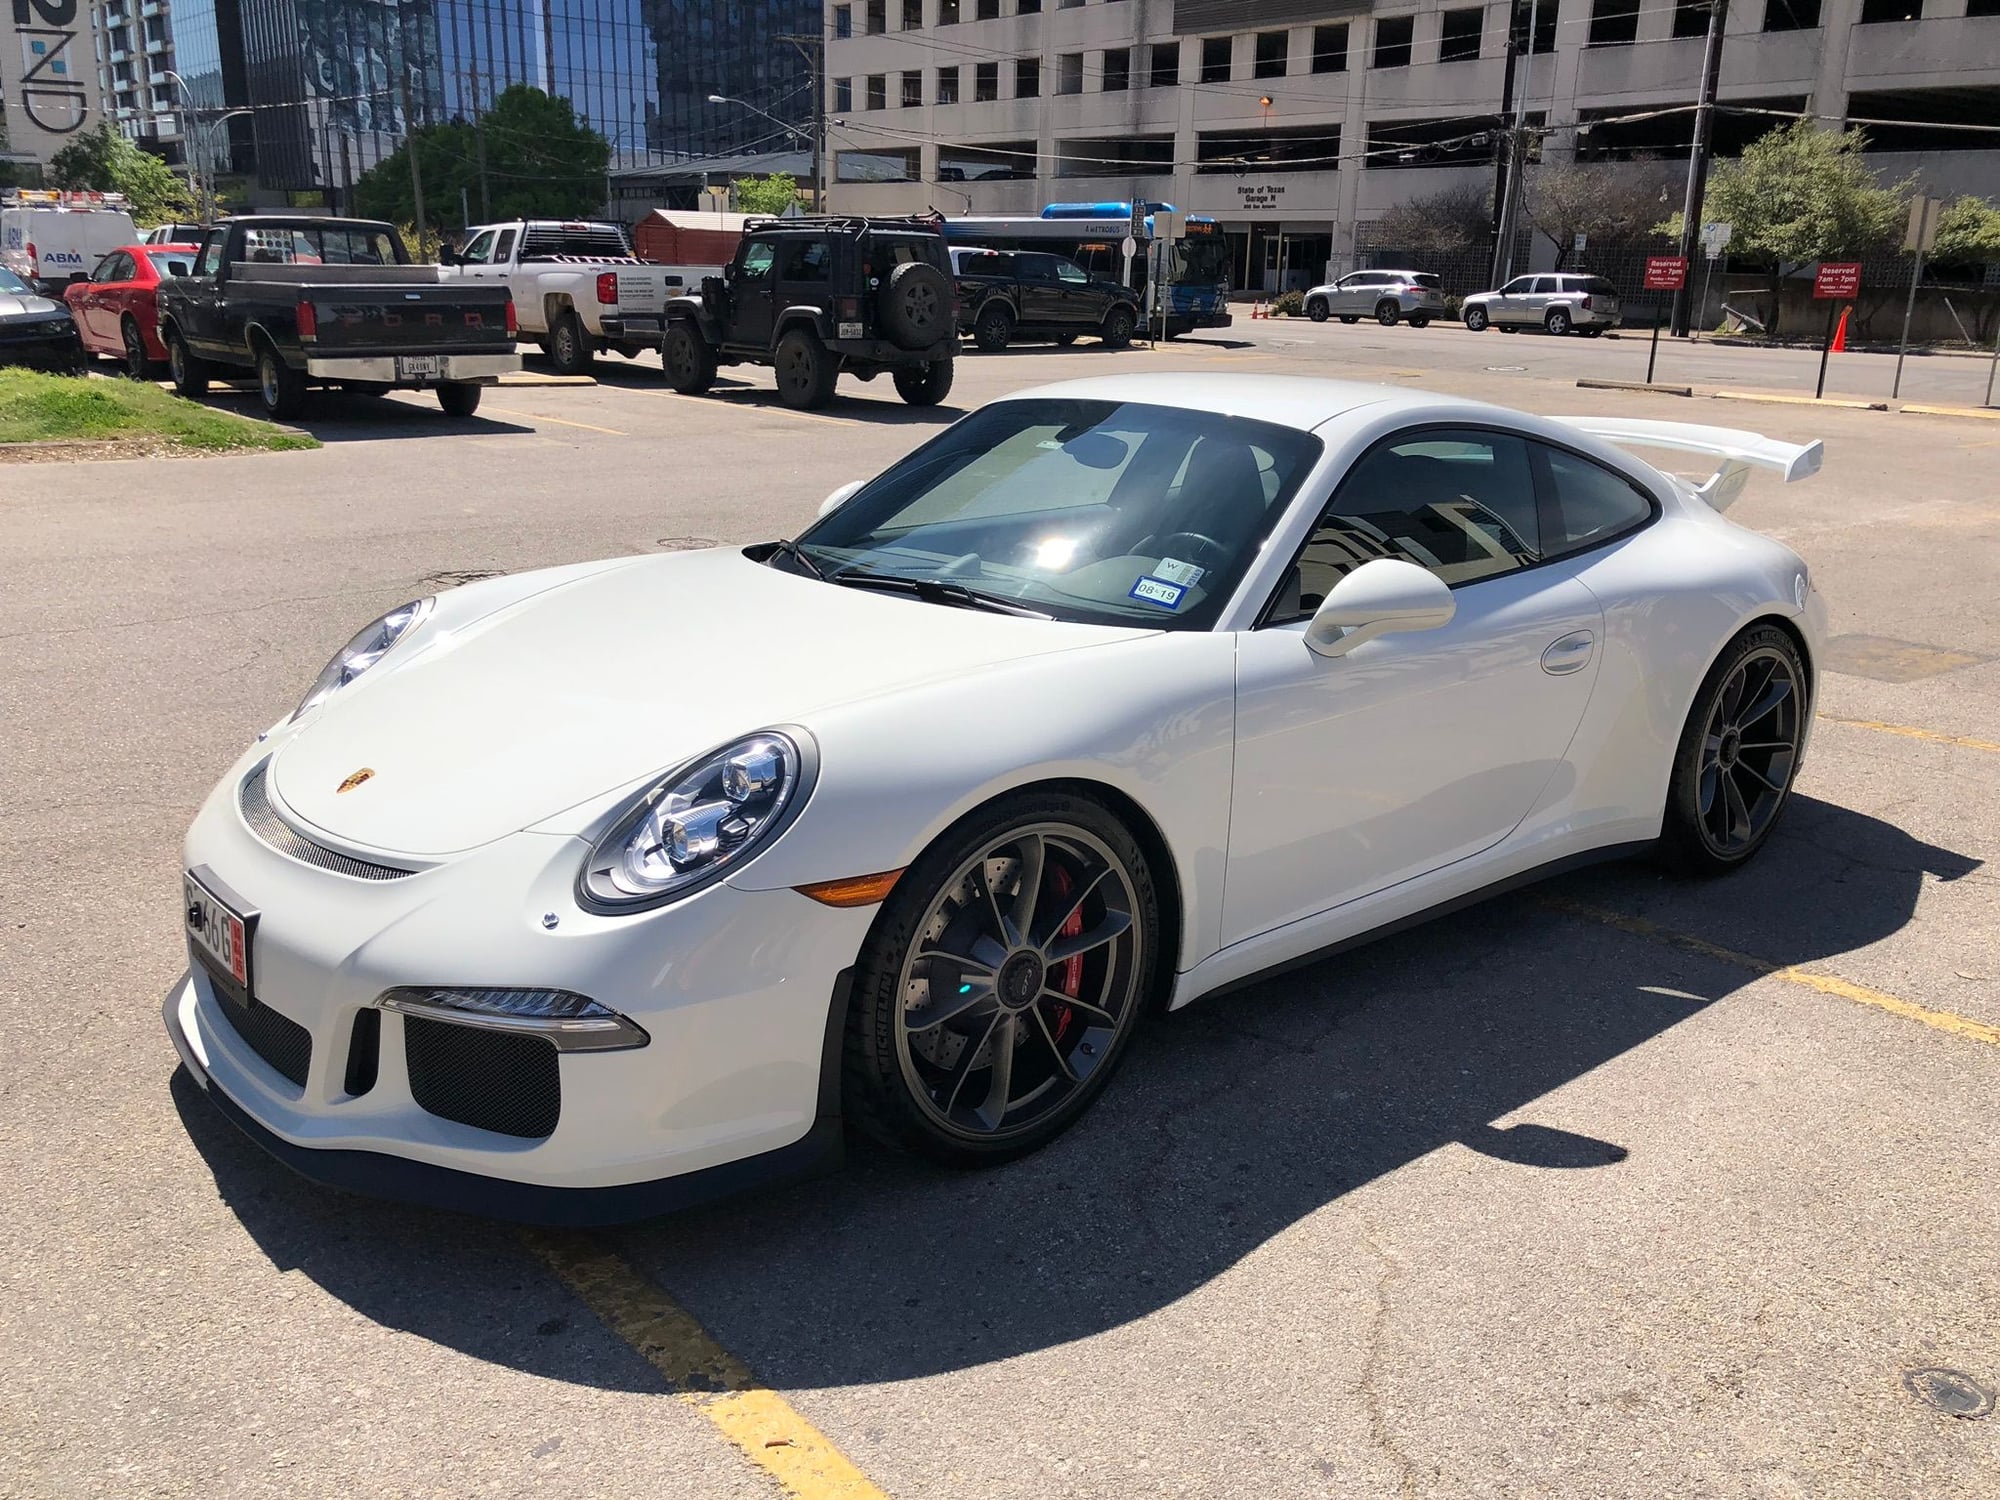 2015 Porsche GT3 - 2015 Porsche 911 GT3, 5,965 miles, original owner, and perfect condition - Used - VIN WP0AC2A98FS184119 - 5,965 Miles - 6 cyl - 2WD - Automatic - Coupe - White - Austin, TX 78701, United States